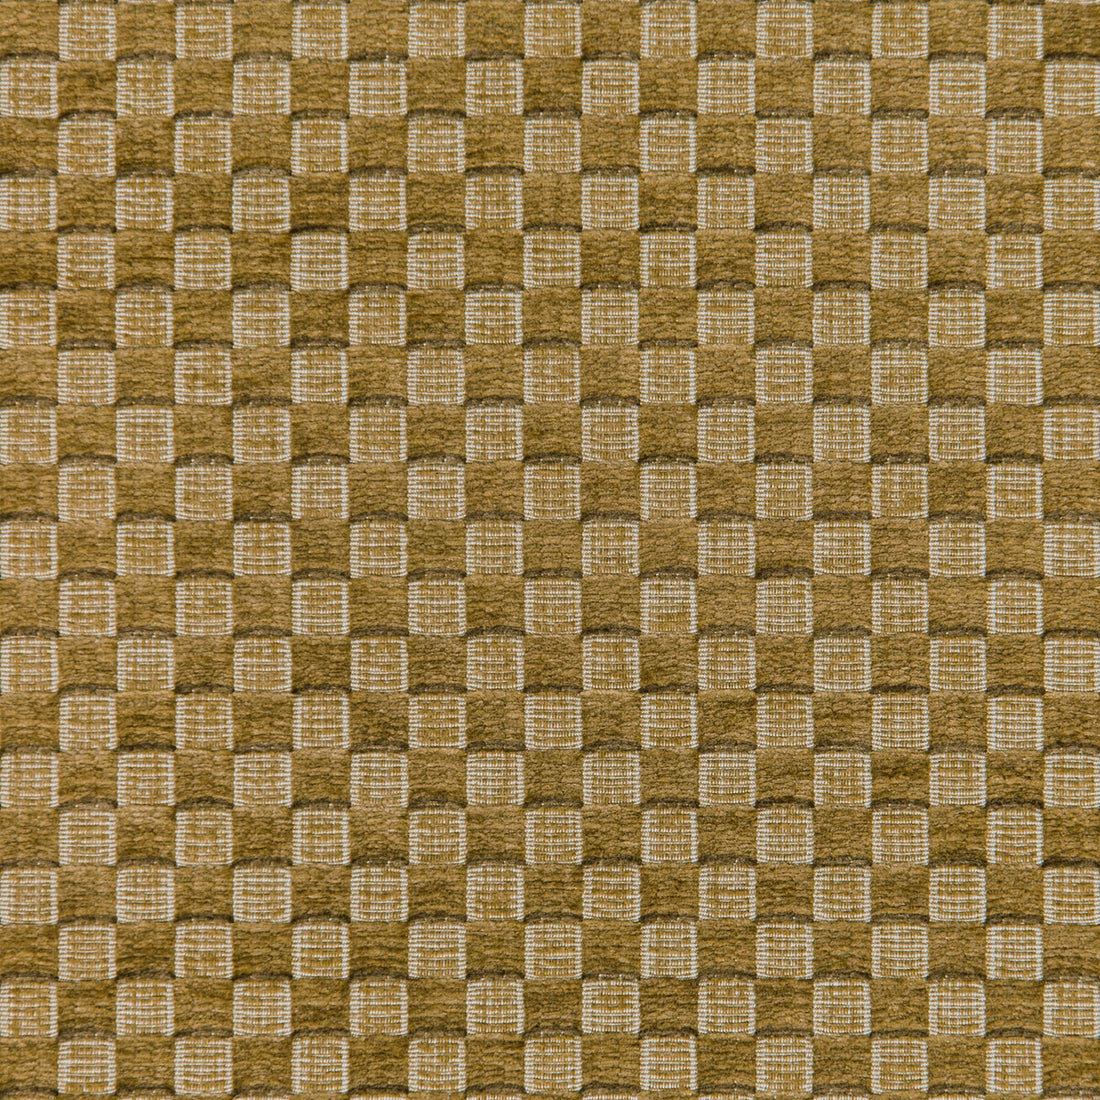 Allonby Weave fabric in fawn color - pattern 2020101.164.0 - by Lee Jofa in the Linford Weaves collection